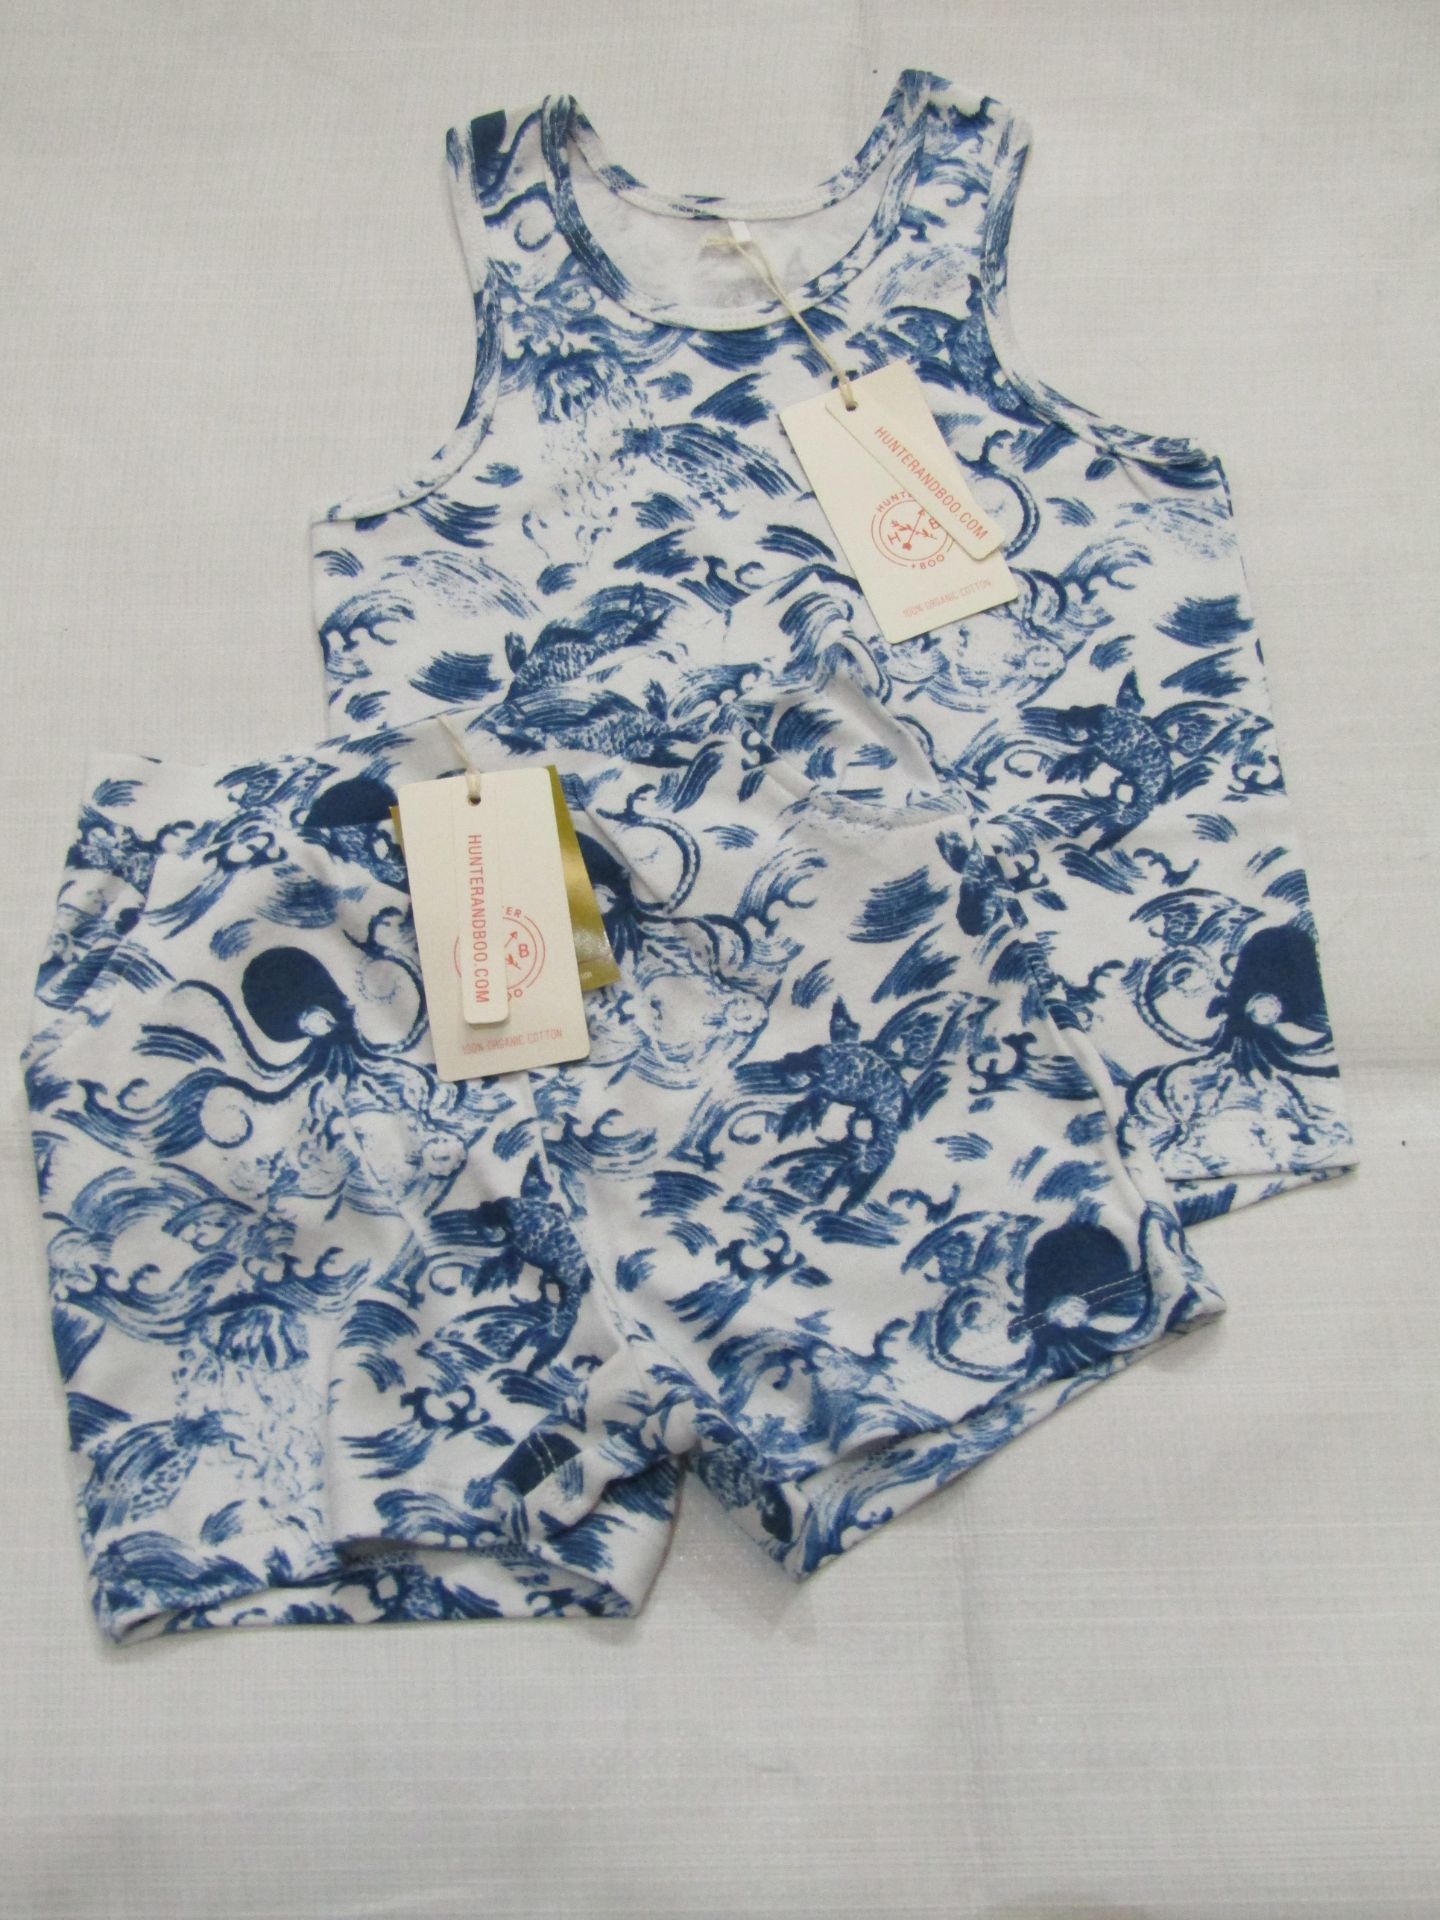 Hunter & Boo Kayio Print Vest & Shorts Blue/White Aged 3-4 yrs New & Packaged RRP œ13 Each